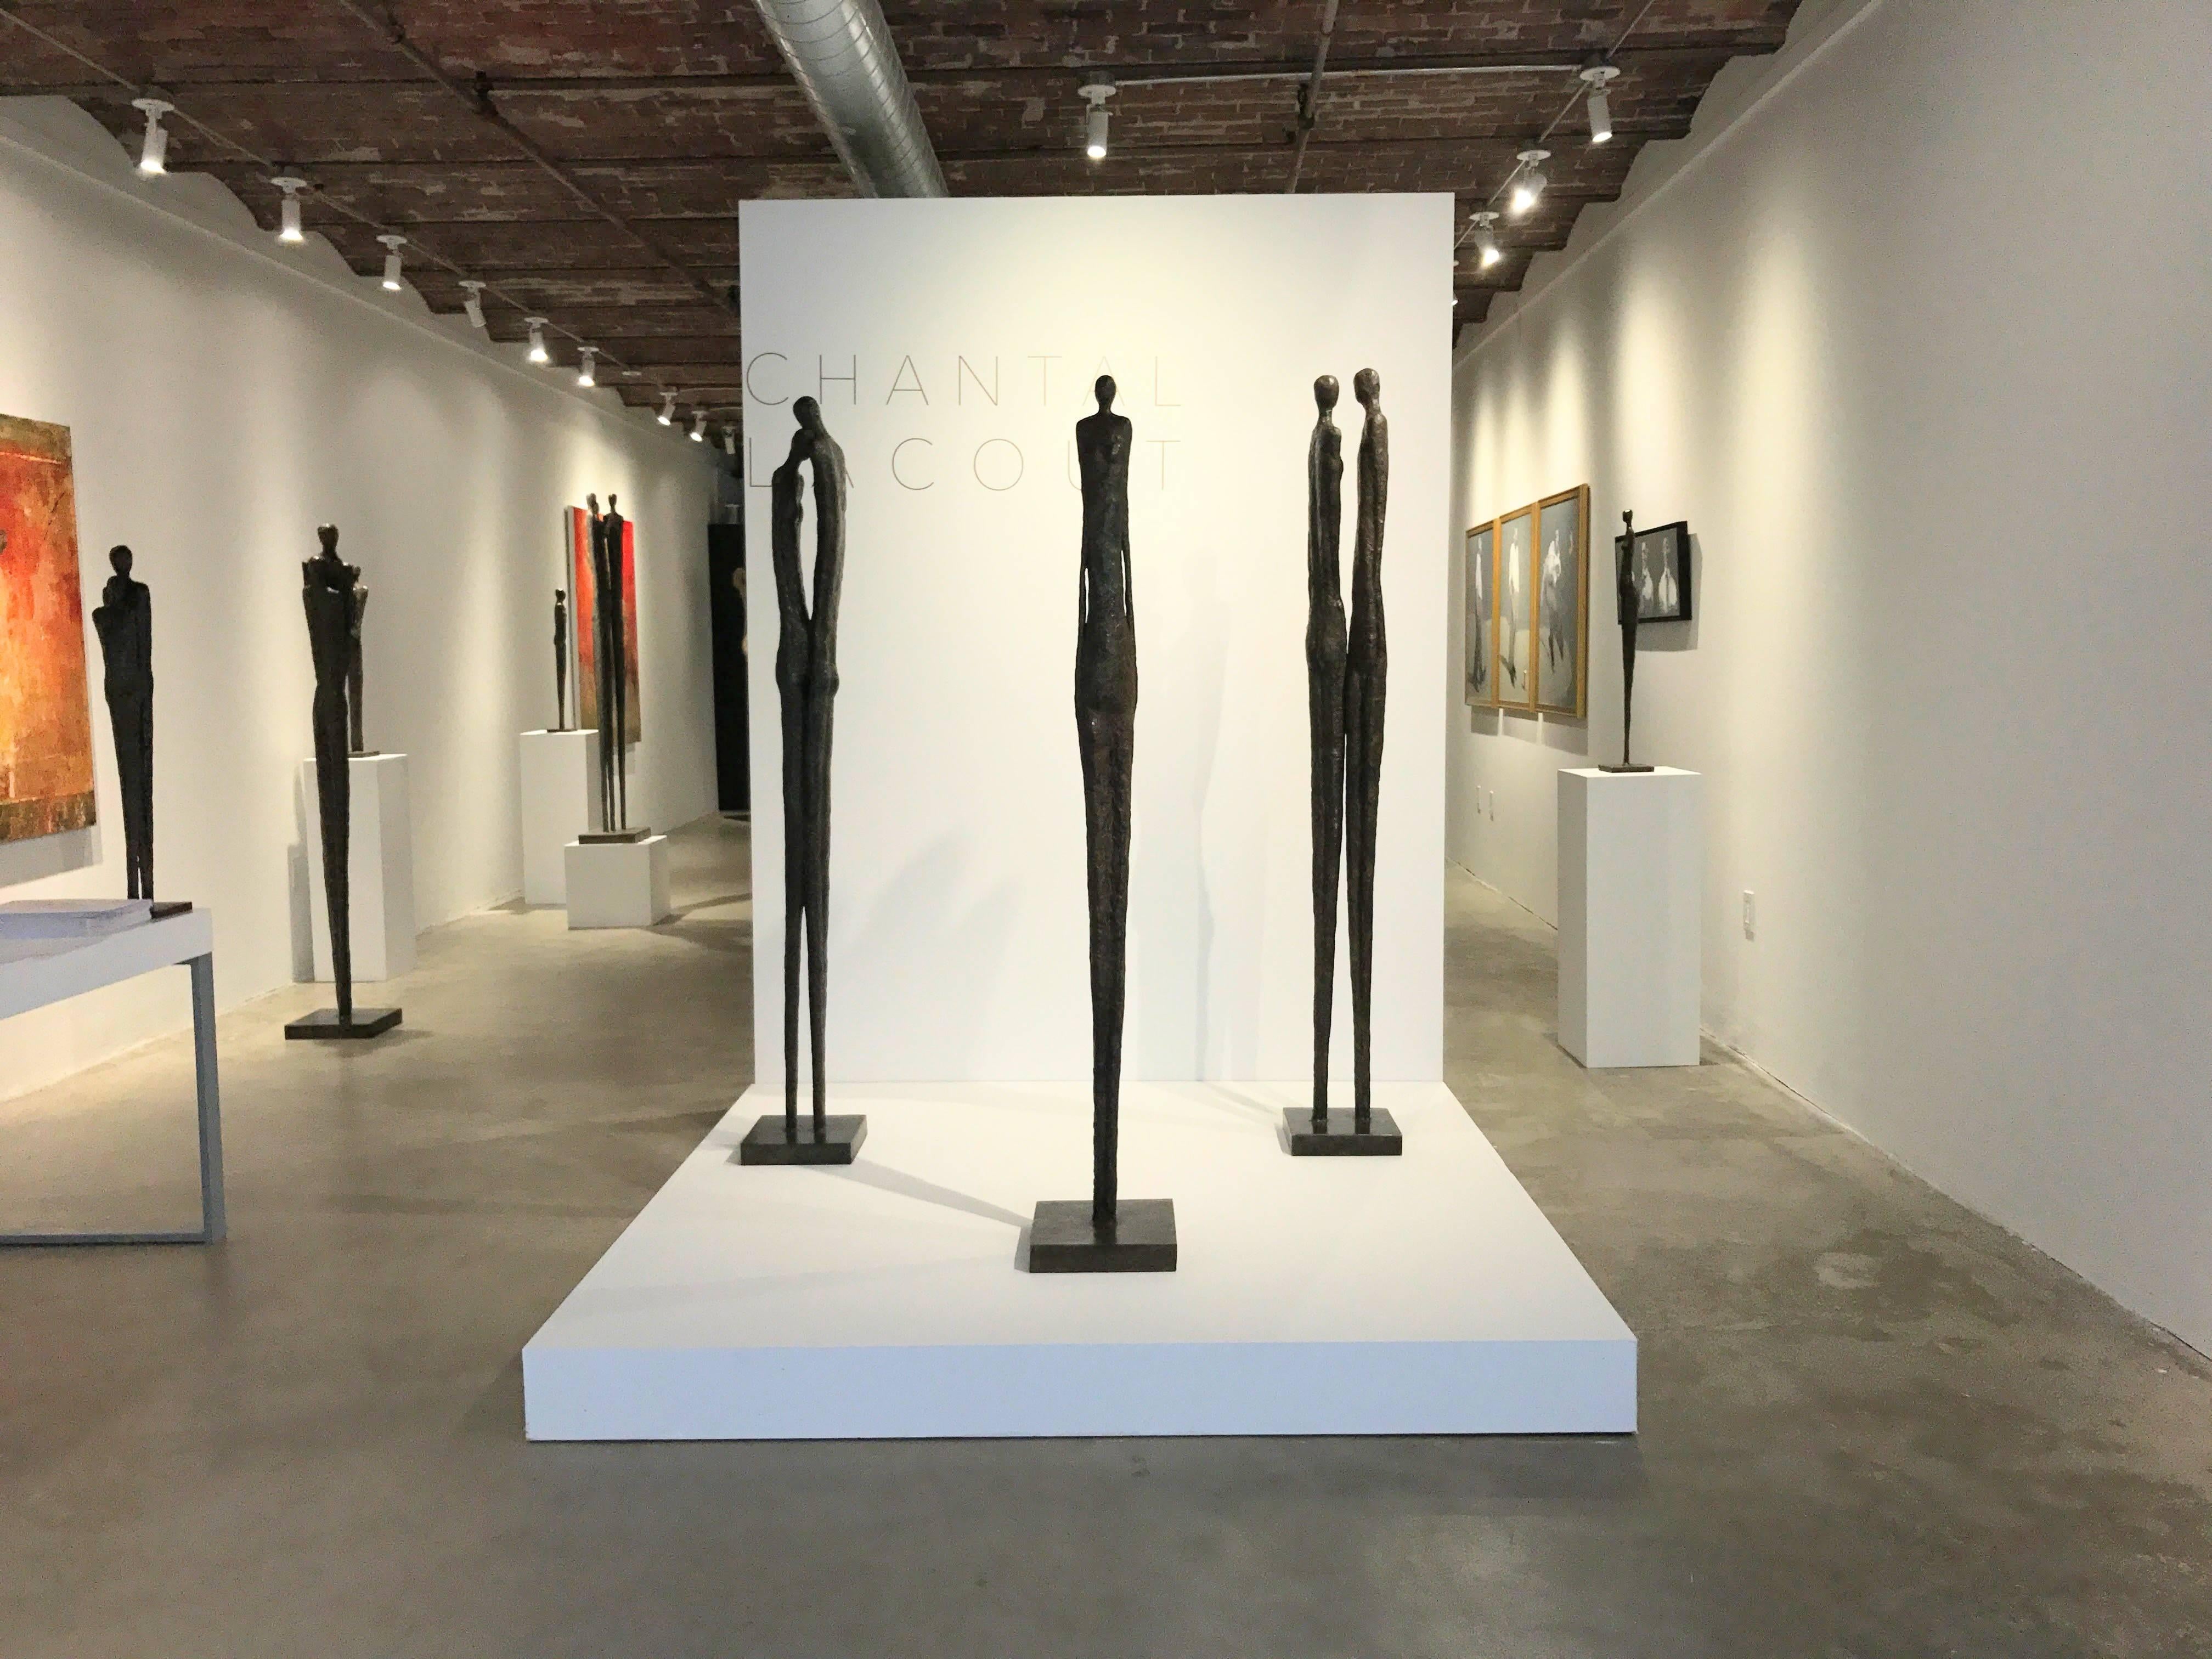 This contemporary bronze sculpture renders three human figures in a line, tall, long, and elegant. Though minimal in detail, this modern sculpture creates a strong relationship between the three figures with using their posture and placement to